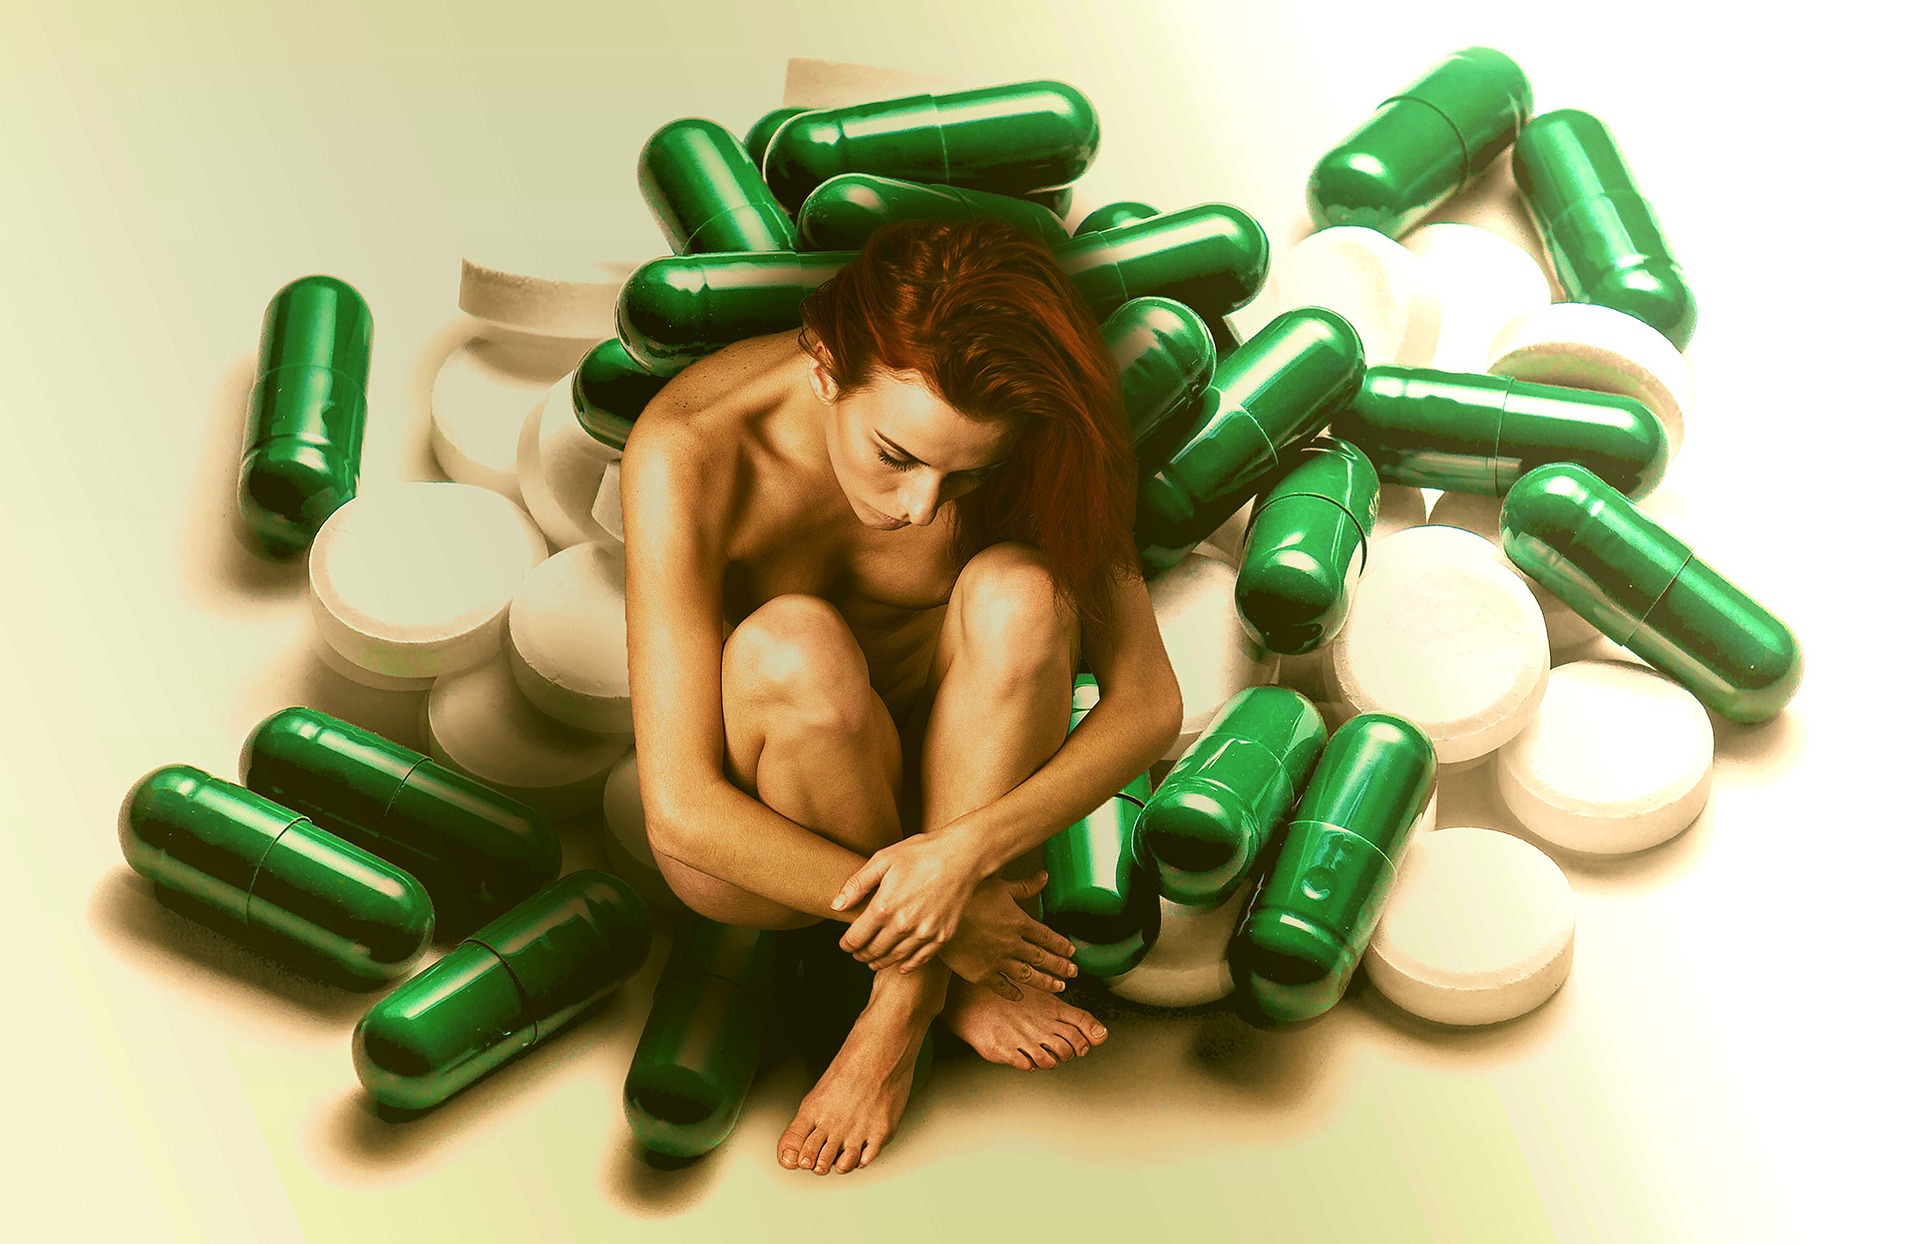 naked woman sitting with meds